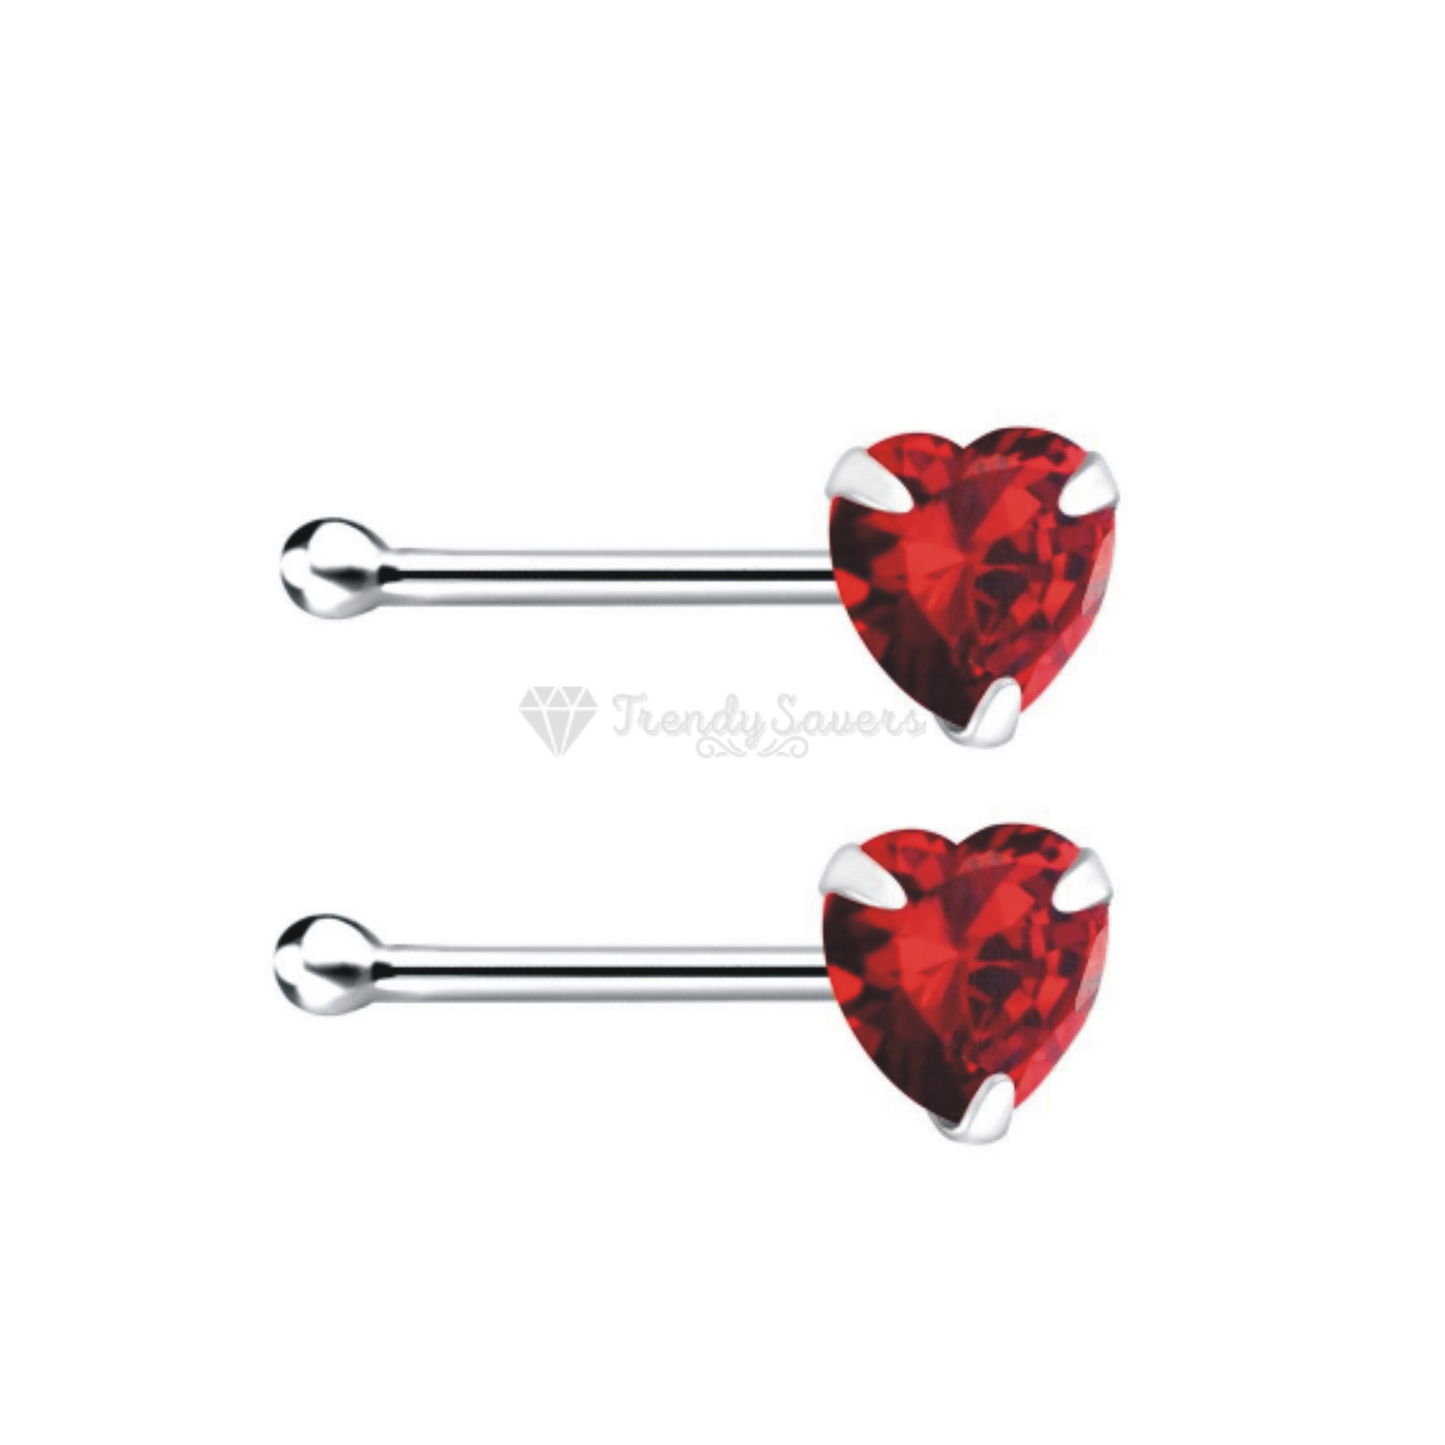 Nose Studs Straight End Bone Screw Red CZ Heart Shape Sterling Silver Piercing